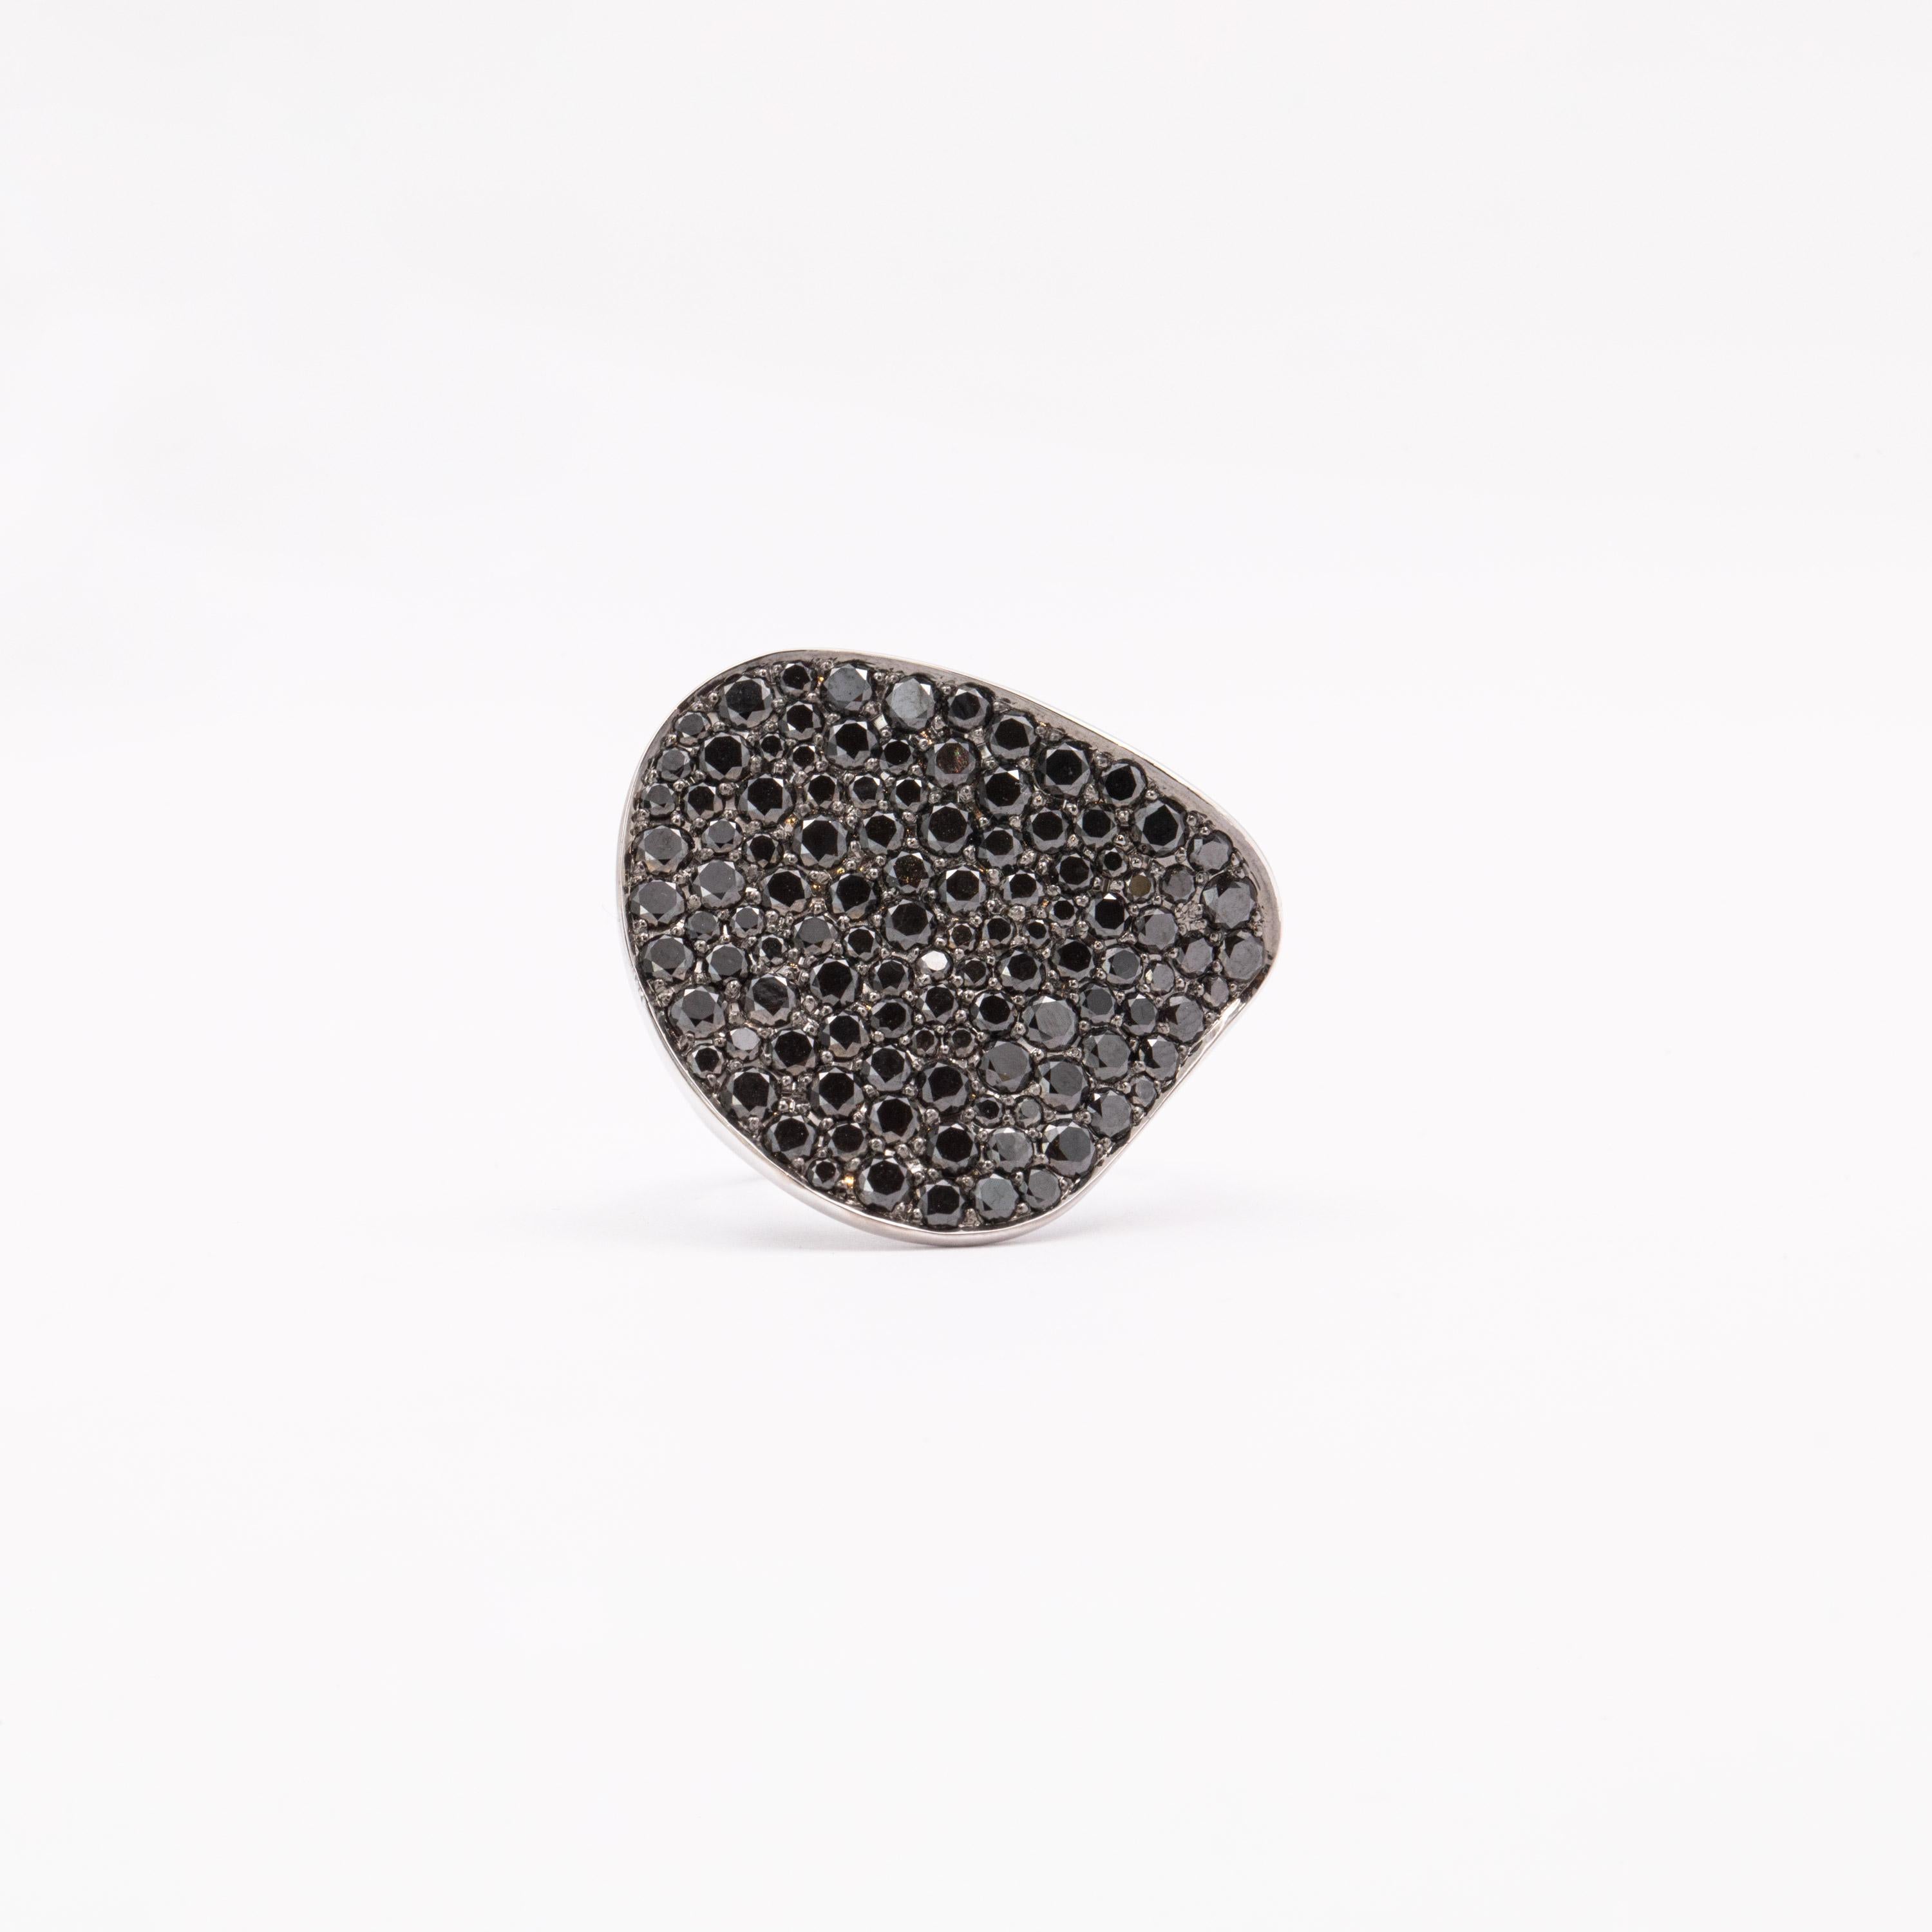 The elegantly curved surface of this remarkable piece is encrusted with a number of 110 black diamonds weighing 4.88 carats. Resembling a leaf bending in the wind, this unique design confers this ring an insouciant appeal, with the undulation